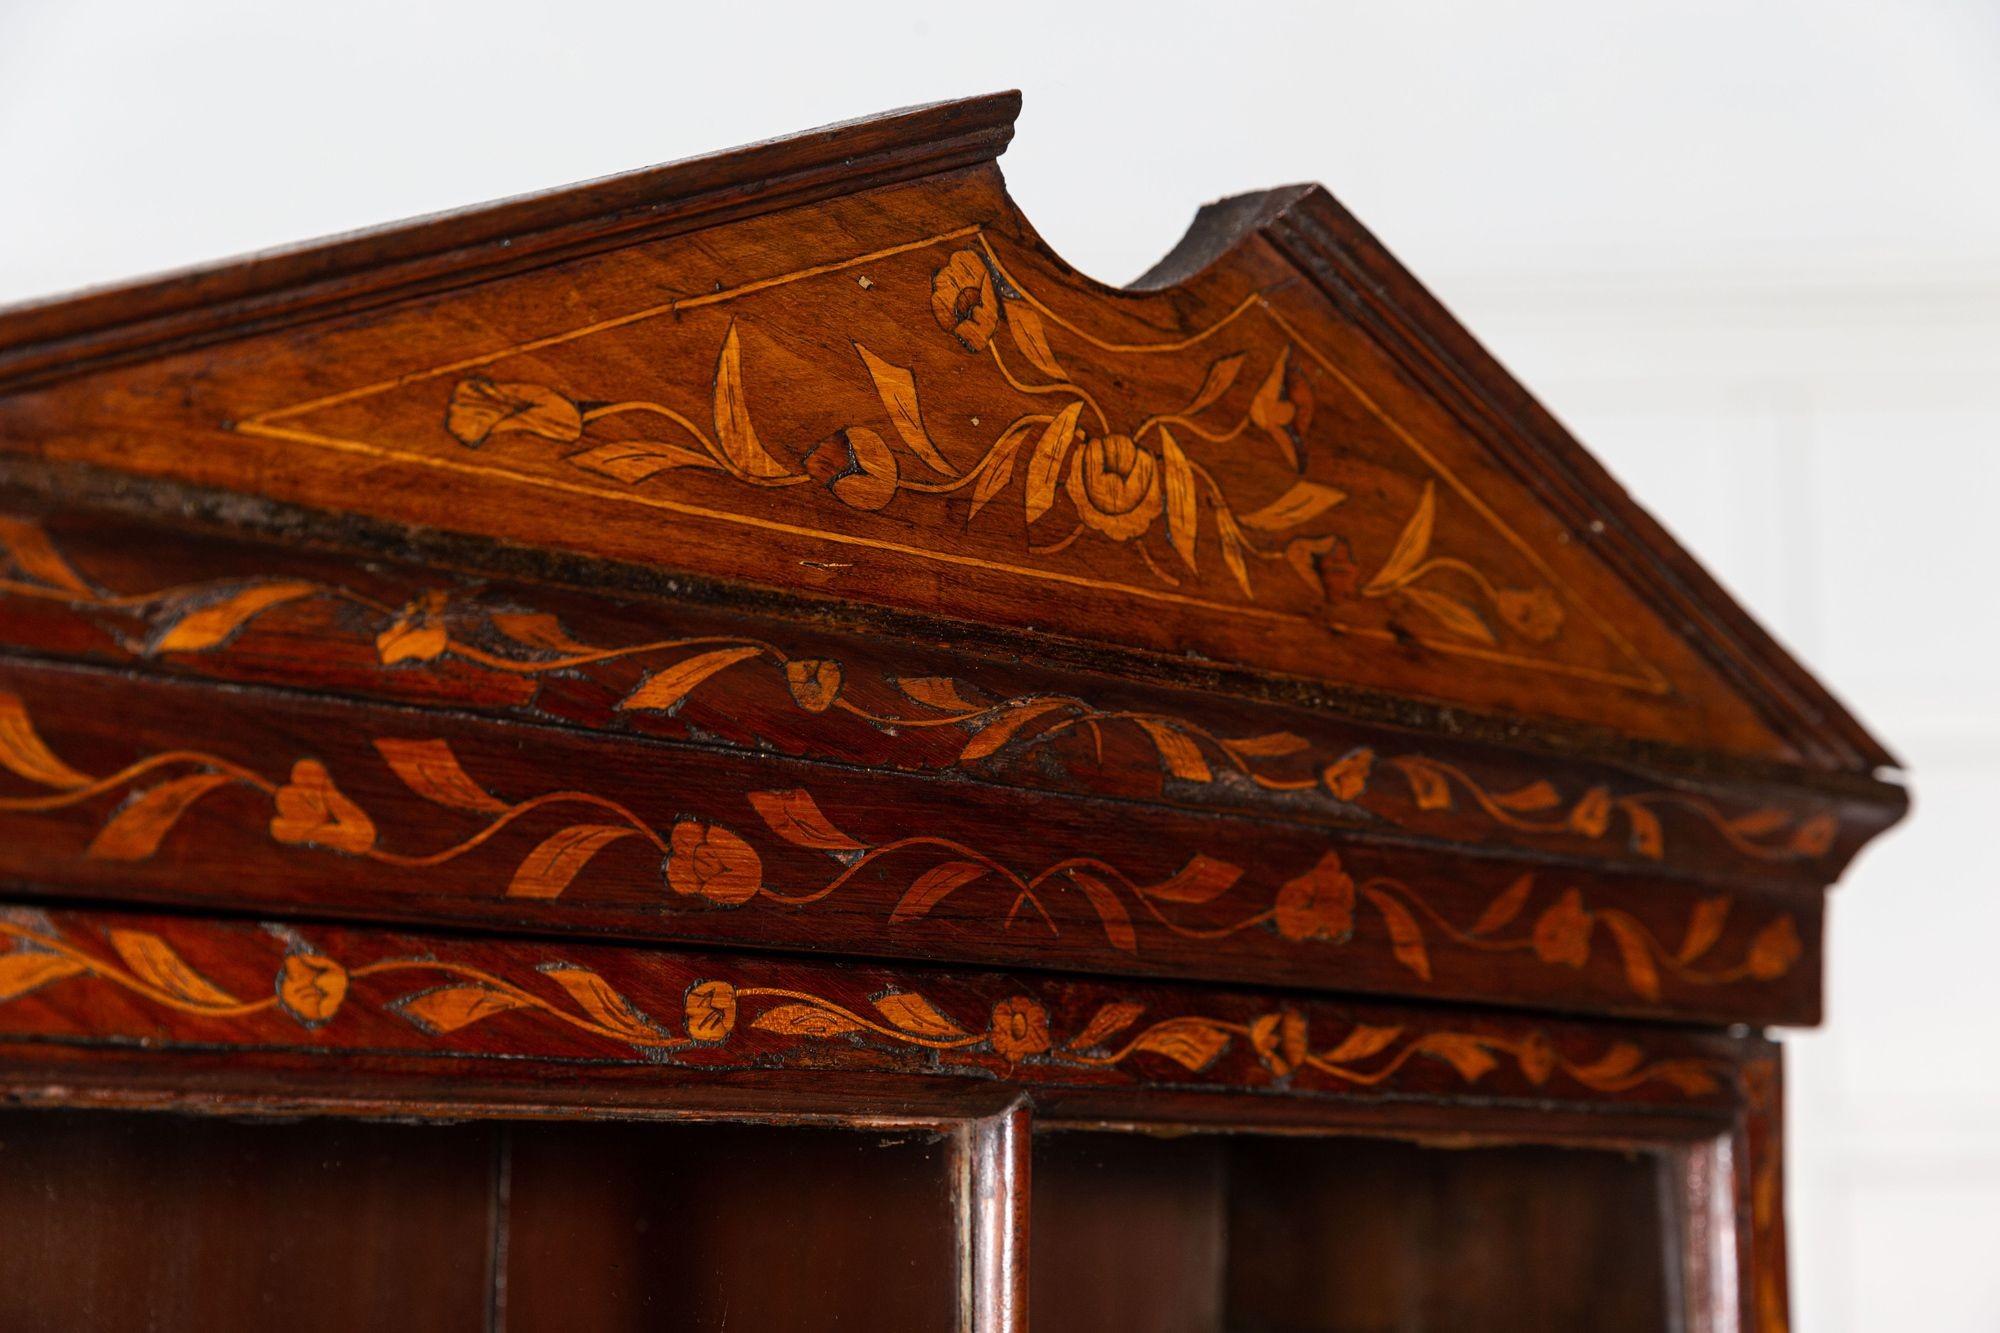 circa 1870
19thC Dutch Mahogany Marquetry Inlaid display cabinet
Excellent form and colour
Measures: W 64 x D 24 x H 84 cm.